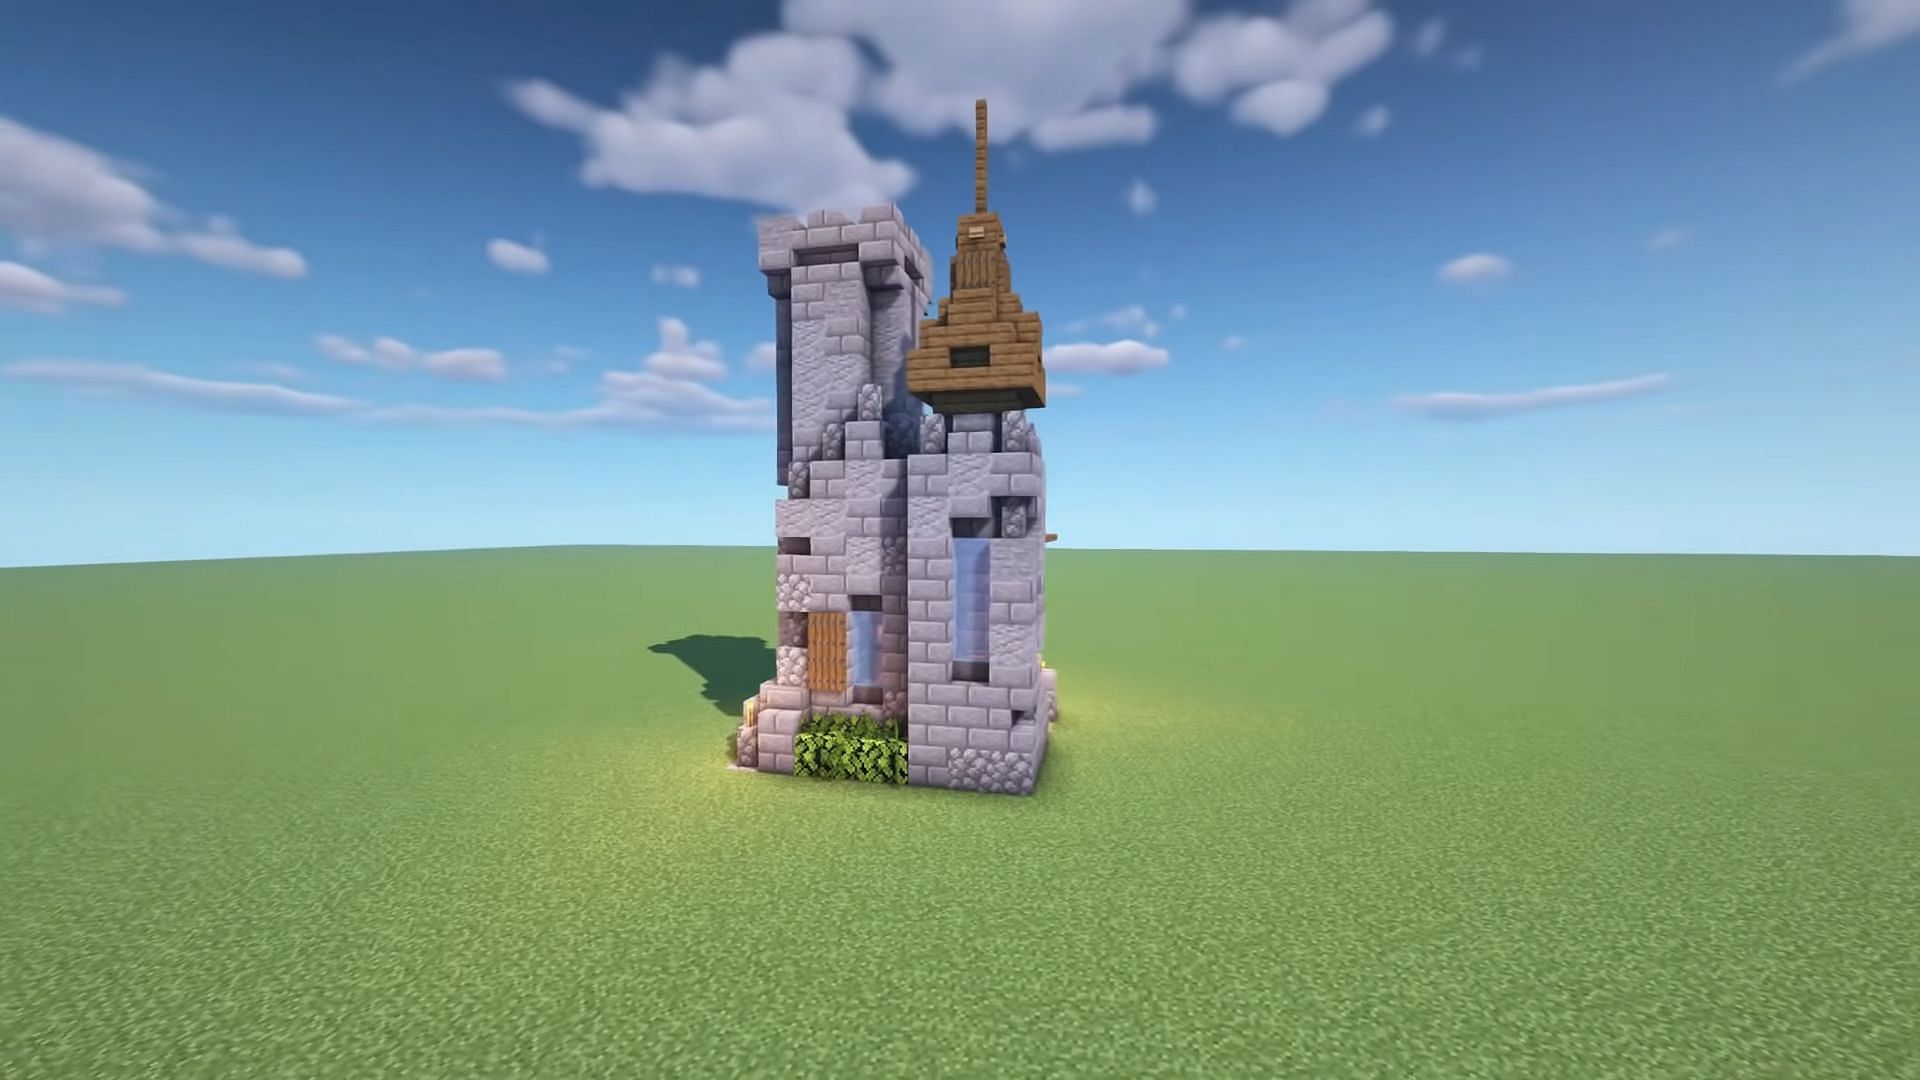 Tiny survival castle design (Image via YT/TheMythicalSausage)